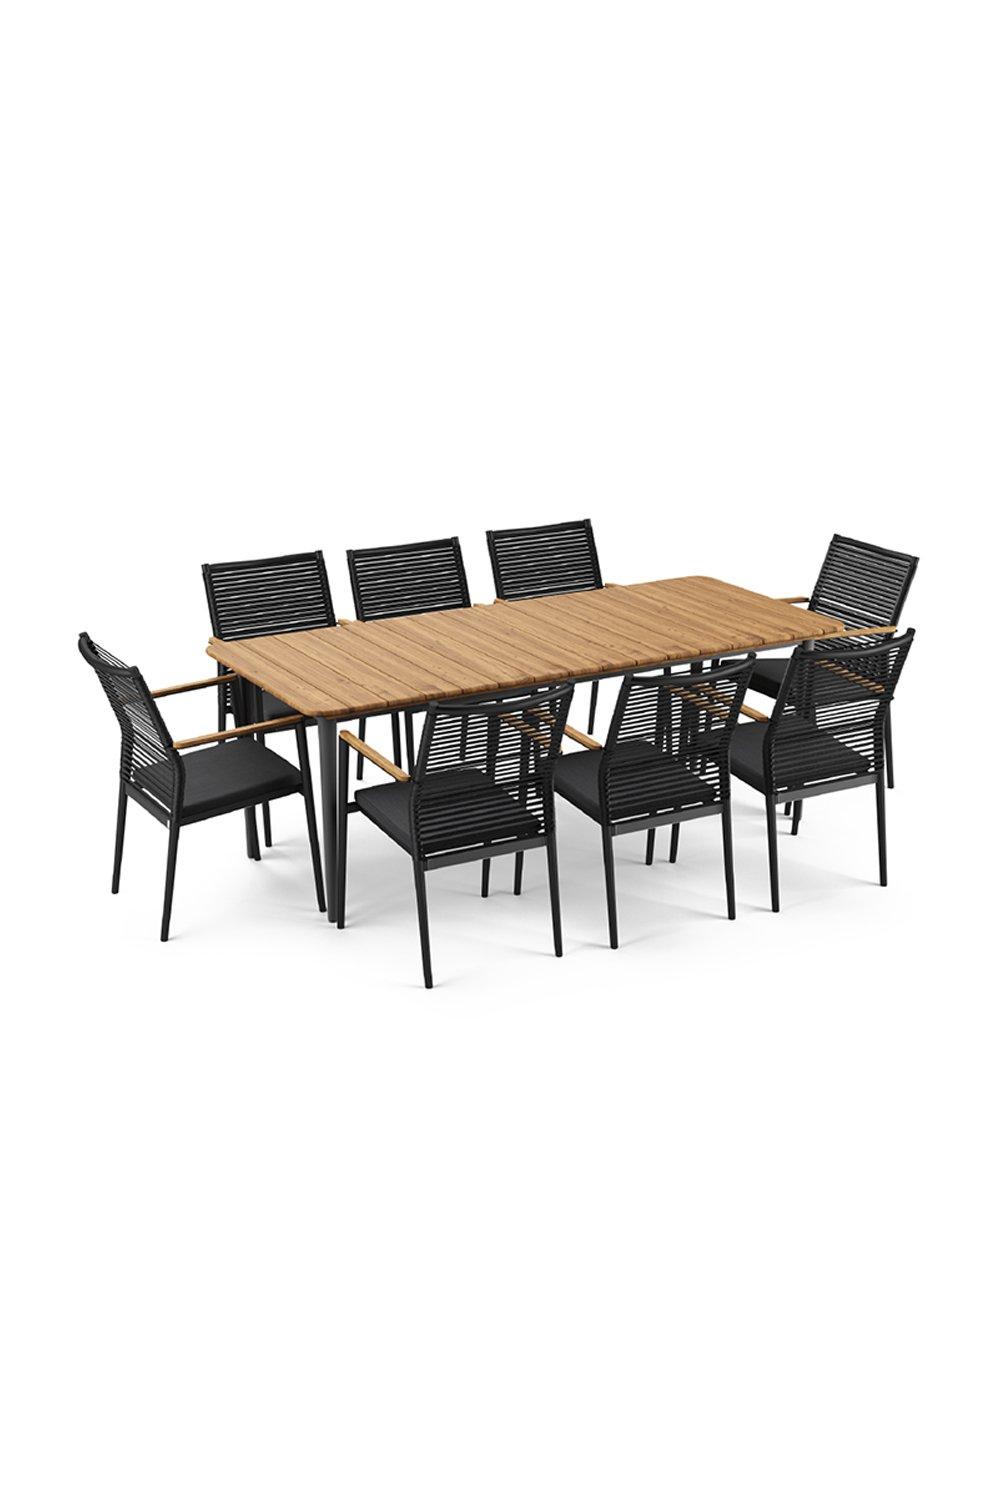 Portland 8 Seat Rectangular Dining Set with Teak Table in Charcoal